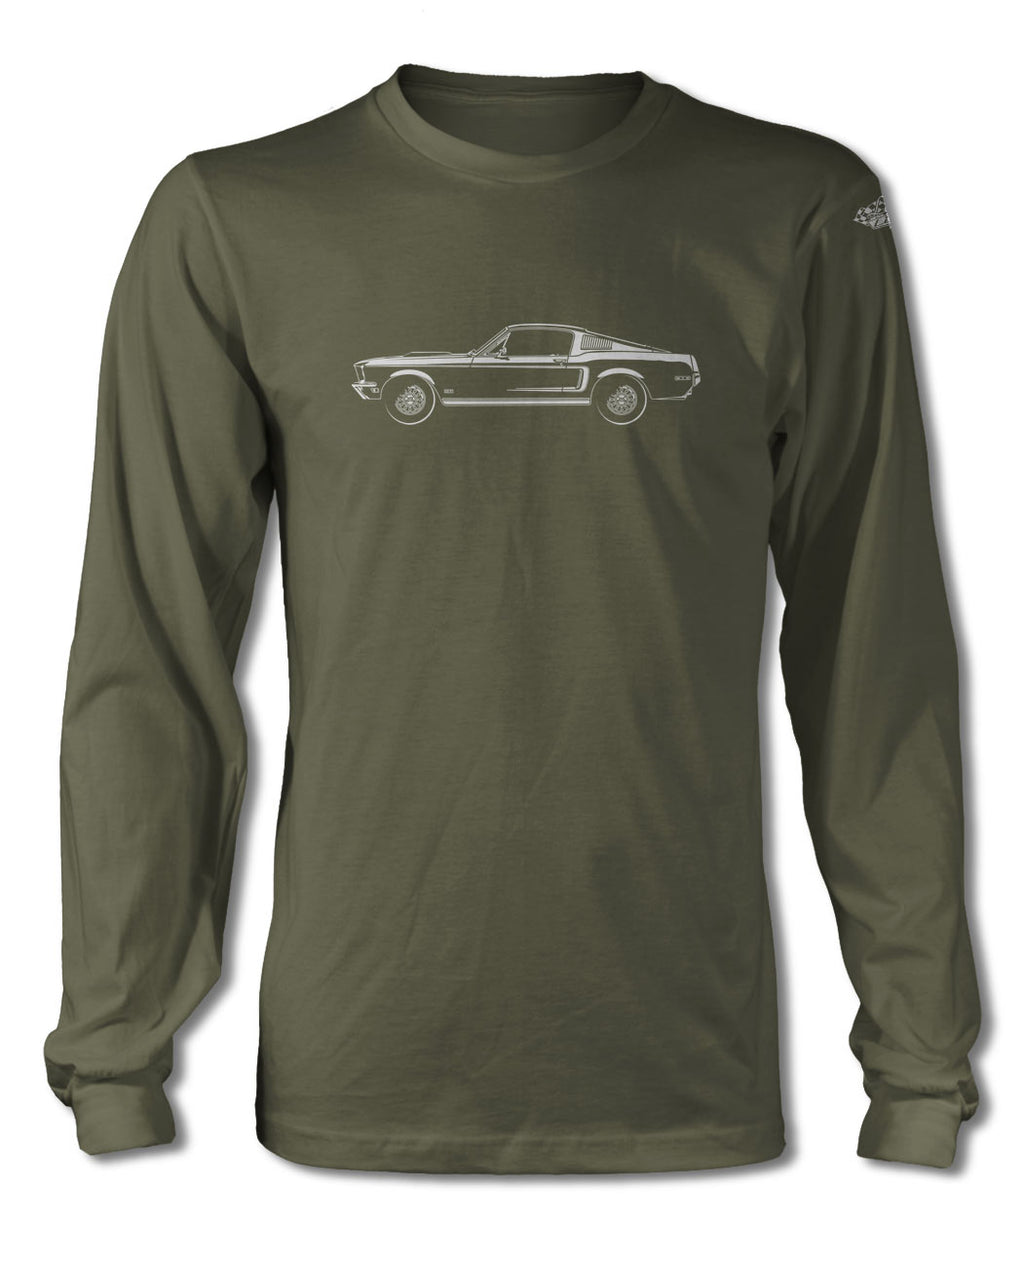 1968 Ford Mustang GT Fastback with Stripes T-Shirt - Long Sleeves - Side View